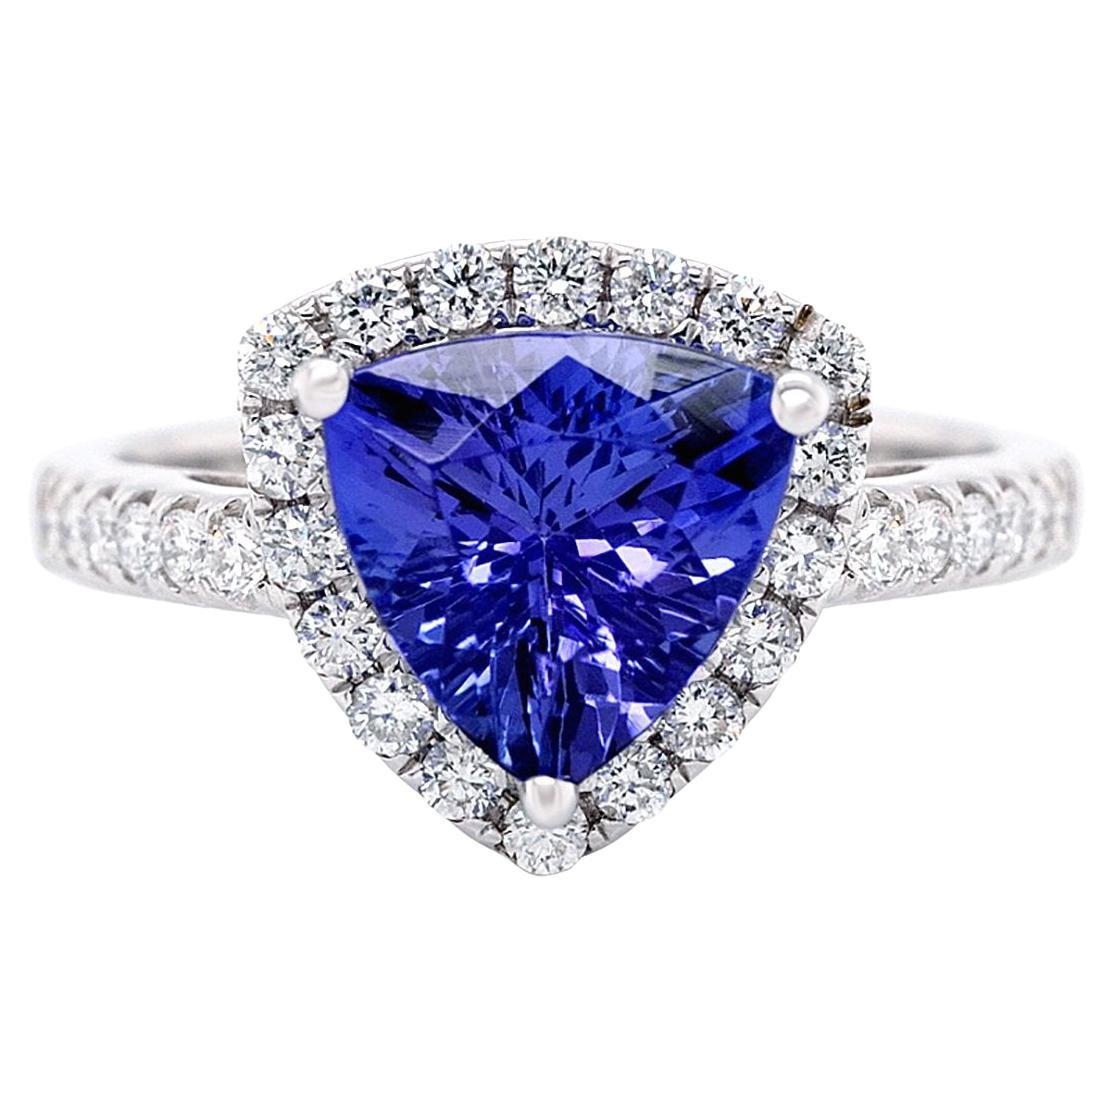 Trillion 2.16ct Tanzanite Ring with 0.38tct Diamond Halo in 14k White Gold For Sale